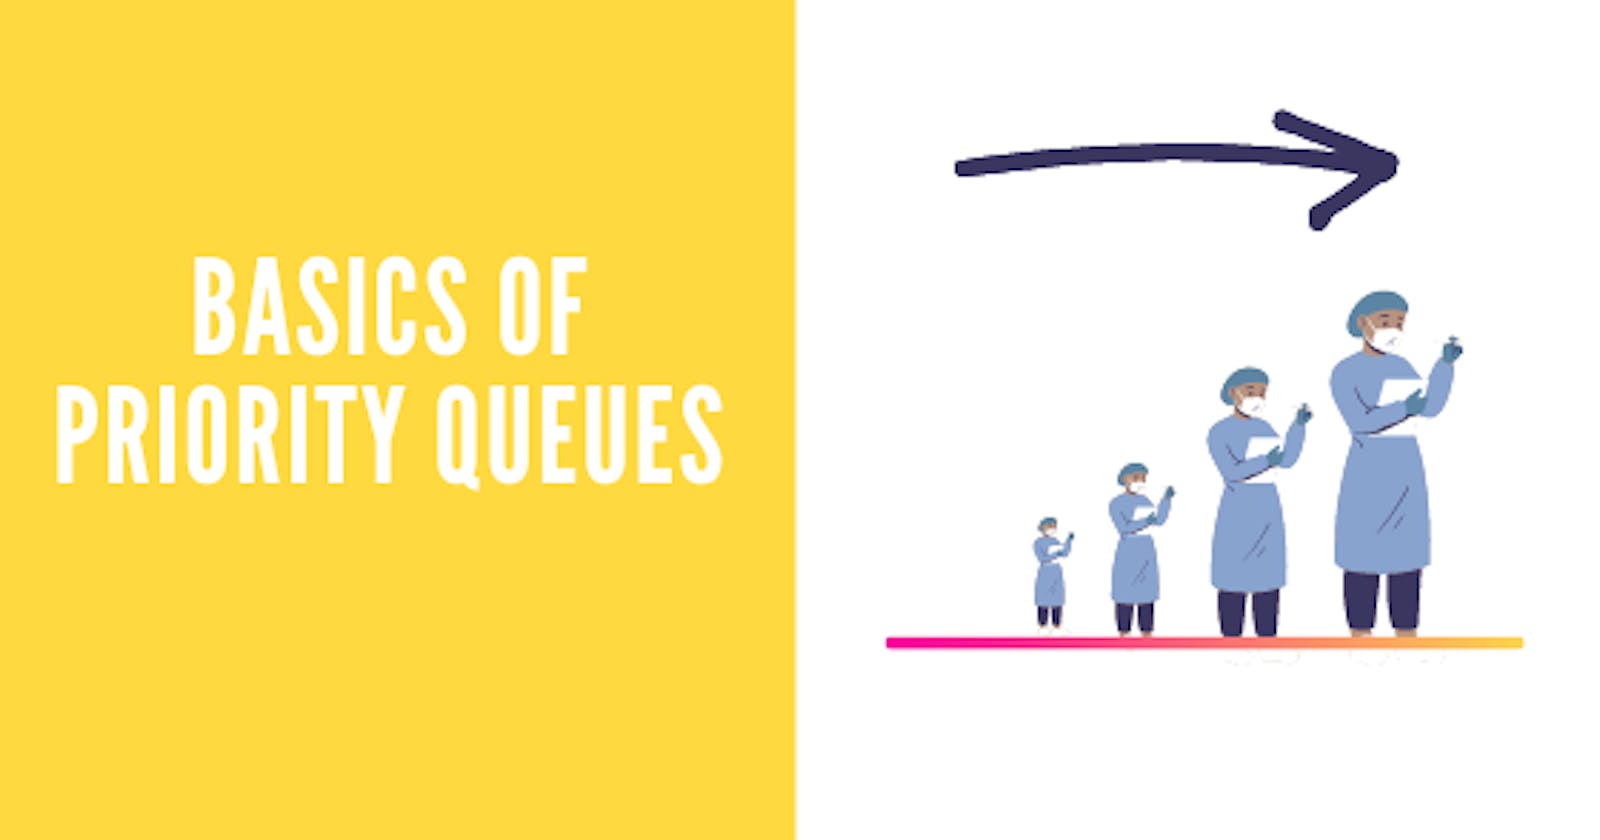 Introduction to Priority Queues. A beginners guide to Priority Queues in Programming.